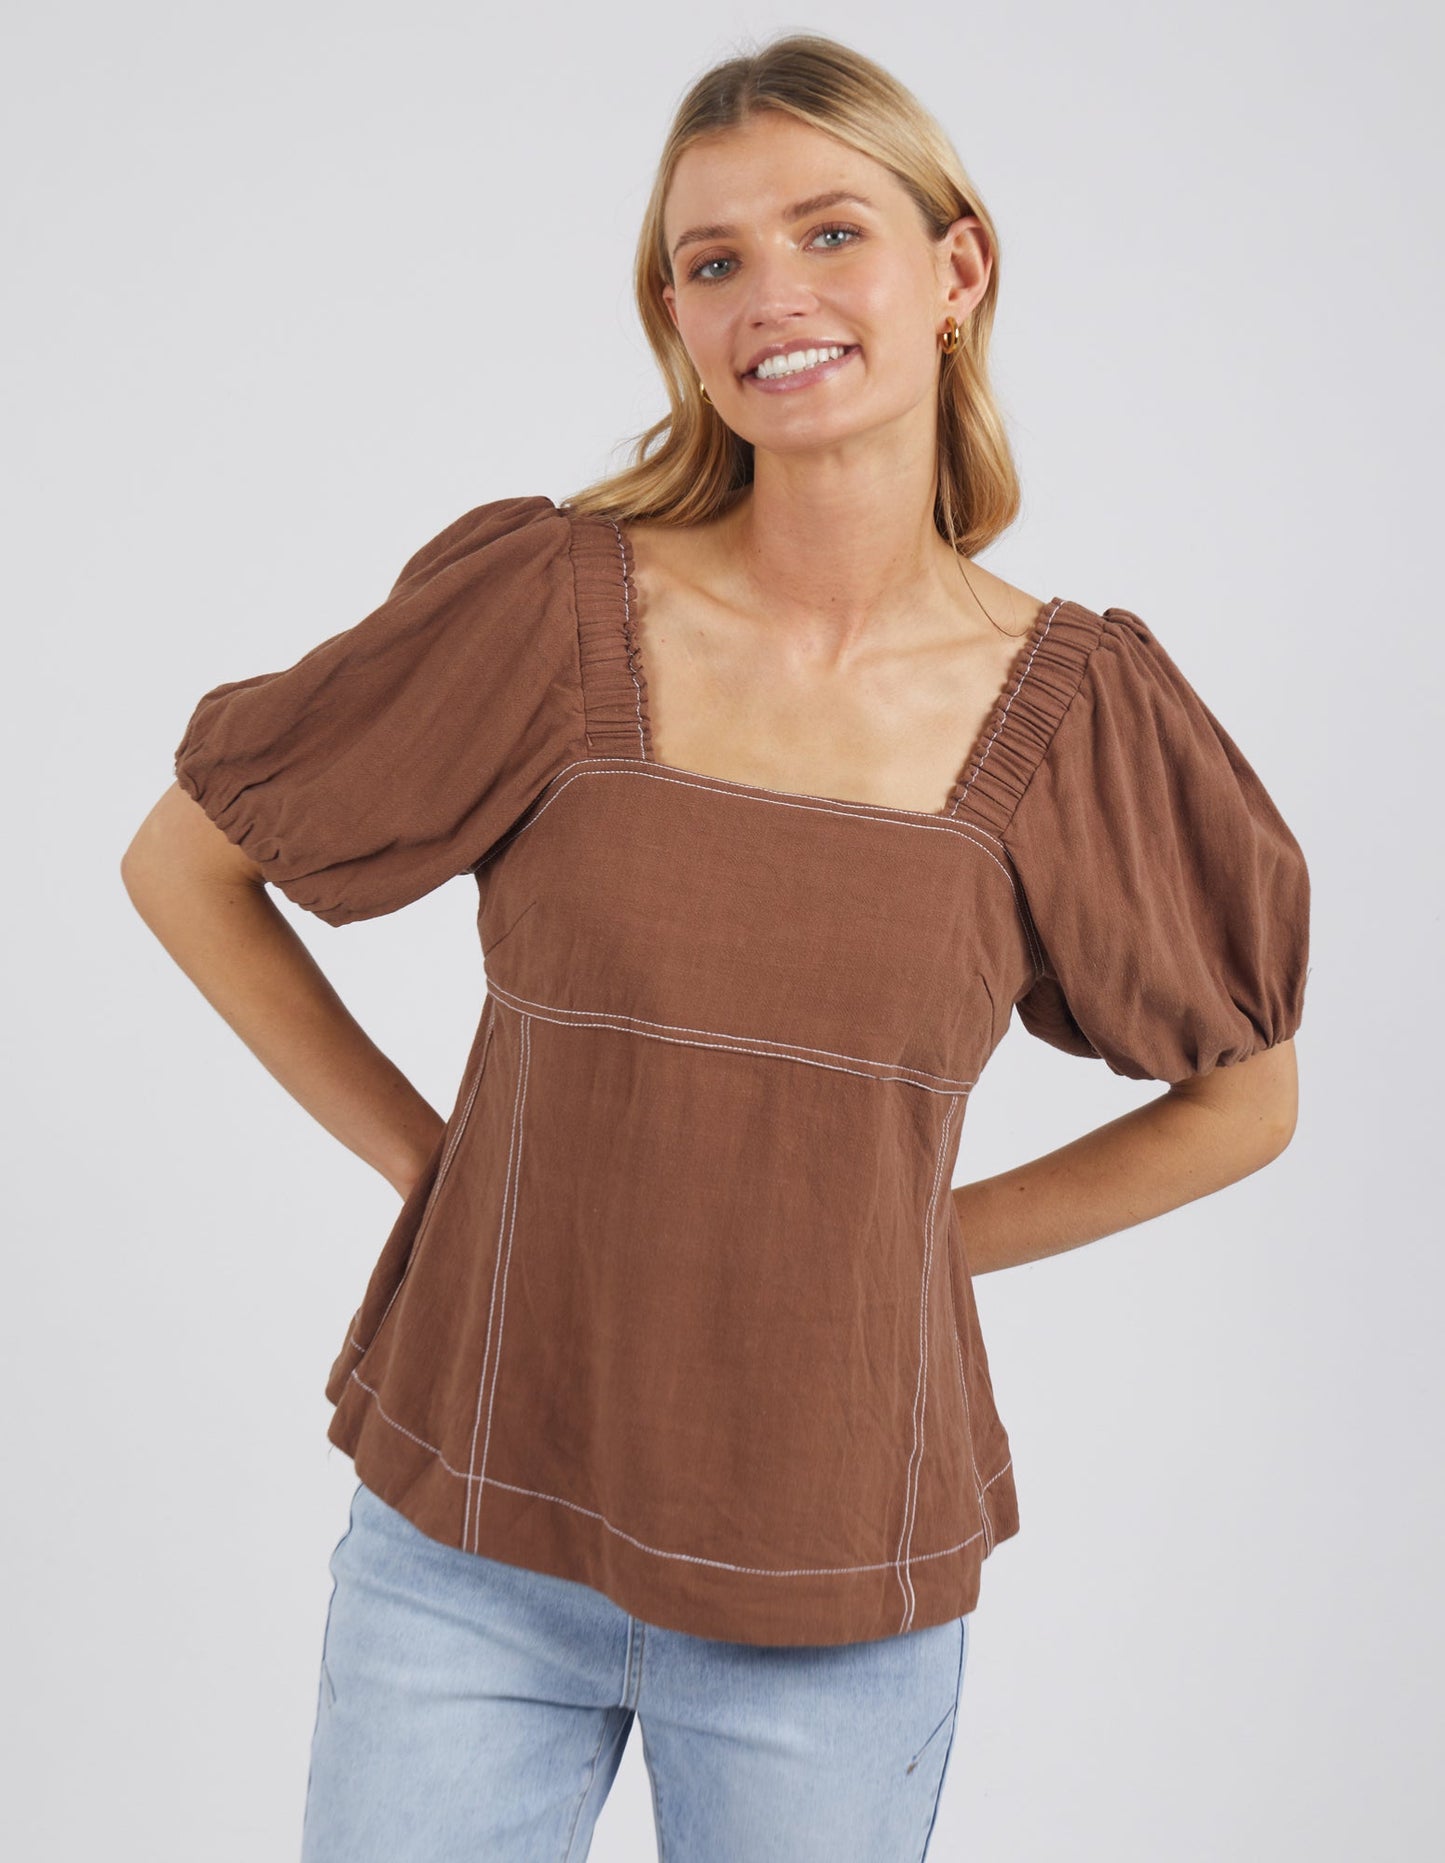 FOXWOOD FLORENCE TOP - BROWN